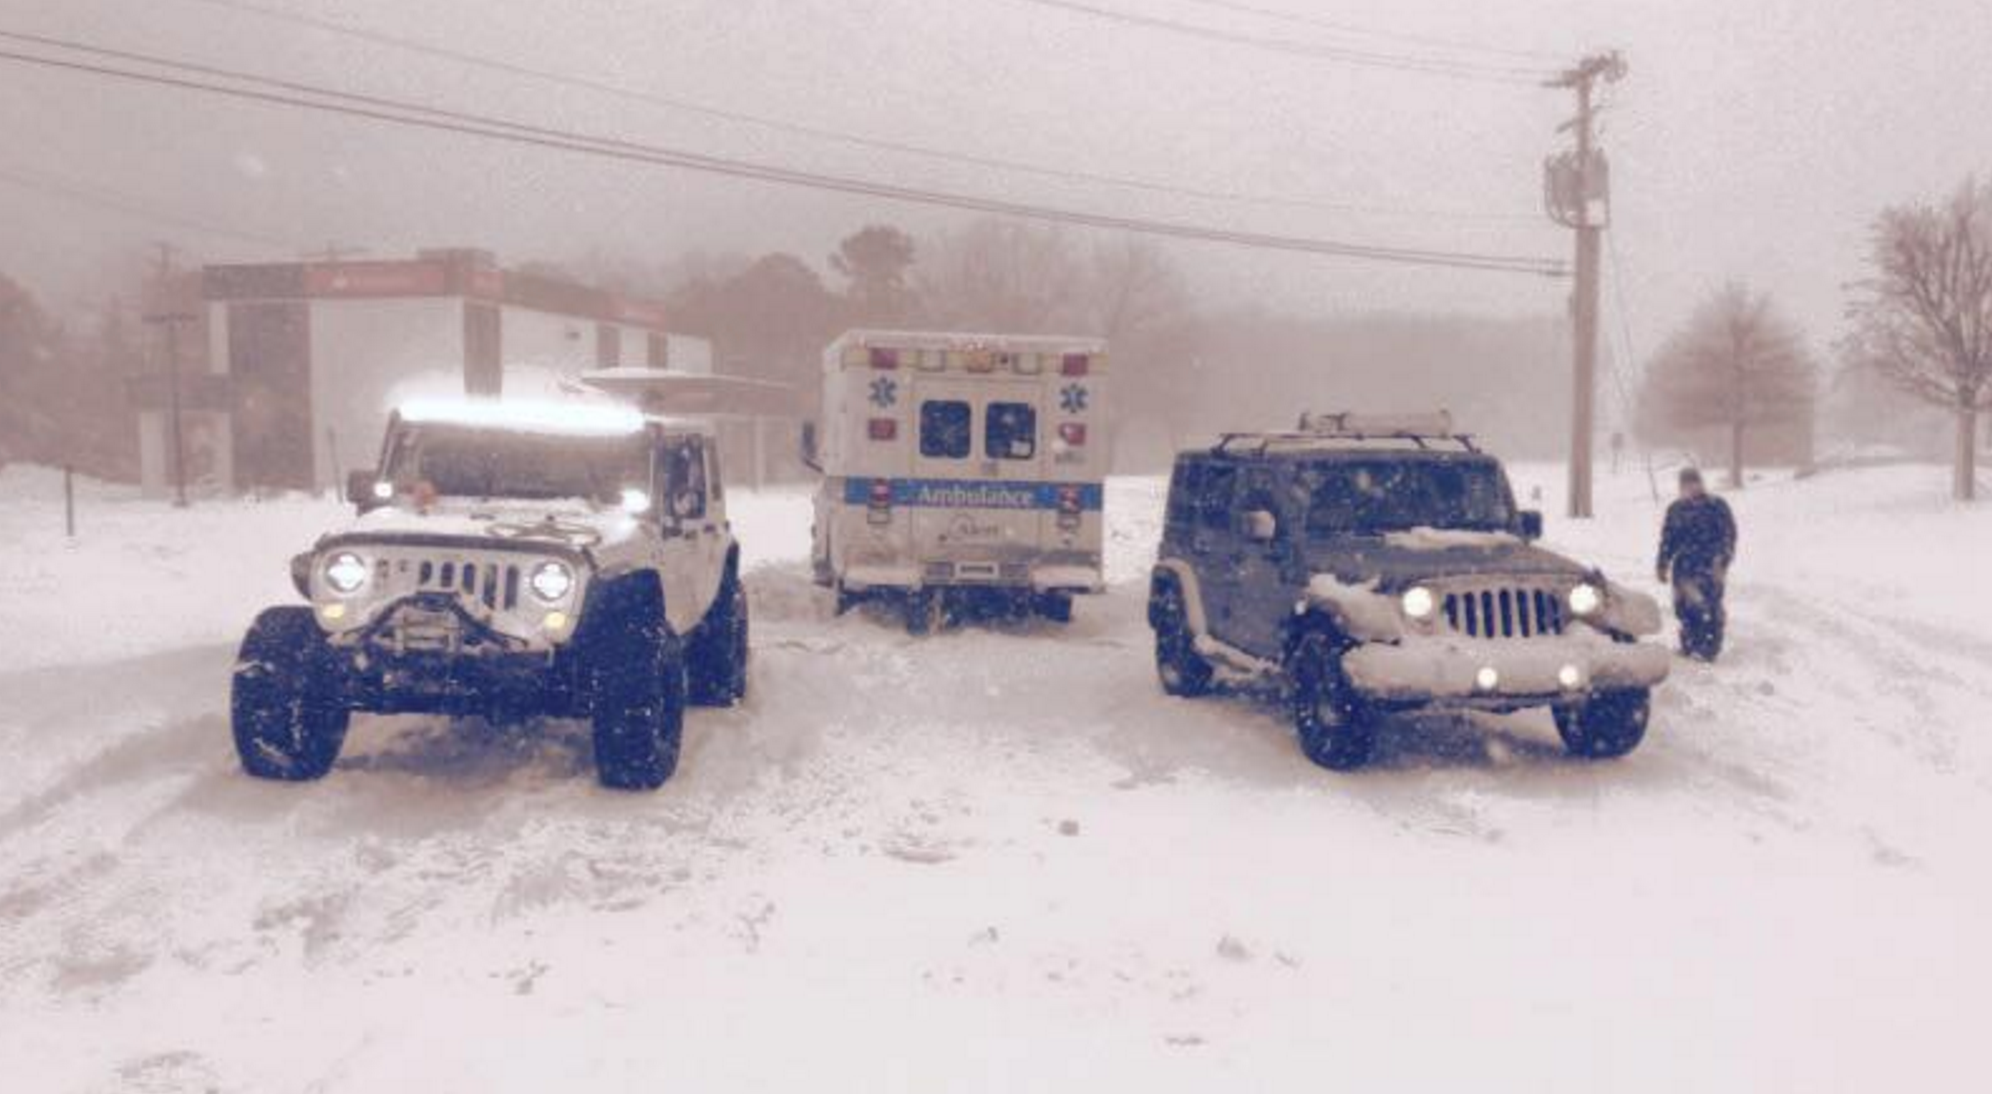  Two Jersey Shore Jeepers club members assisting a stuck ambulance during last week's blizzard. (Photo courtesy of Jersey Shore Jeepers) 